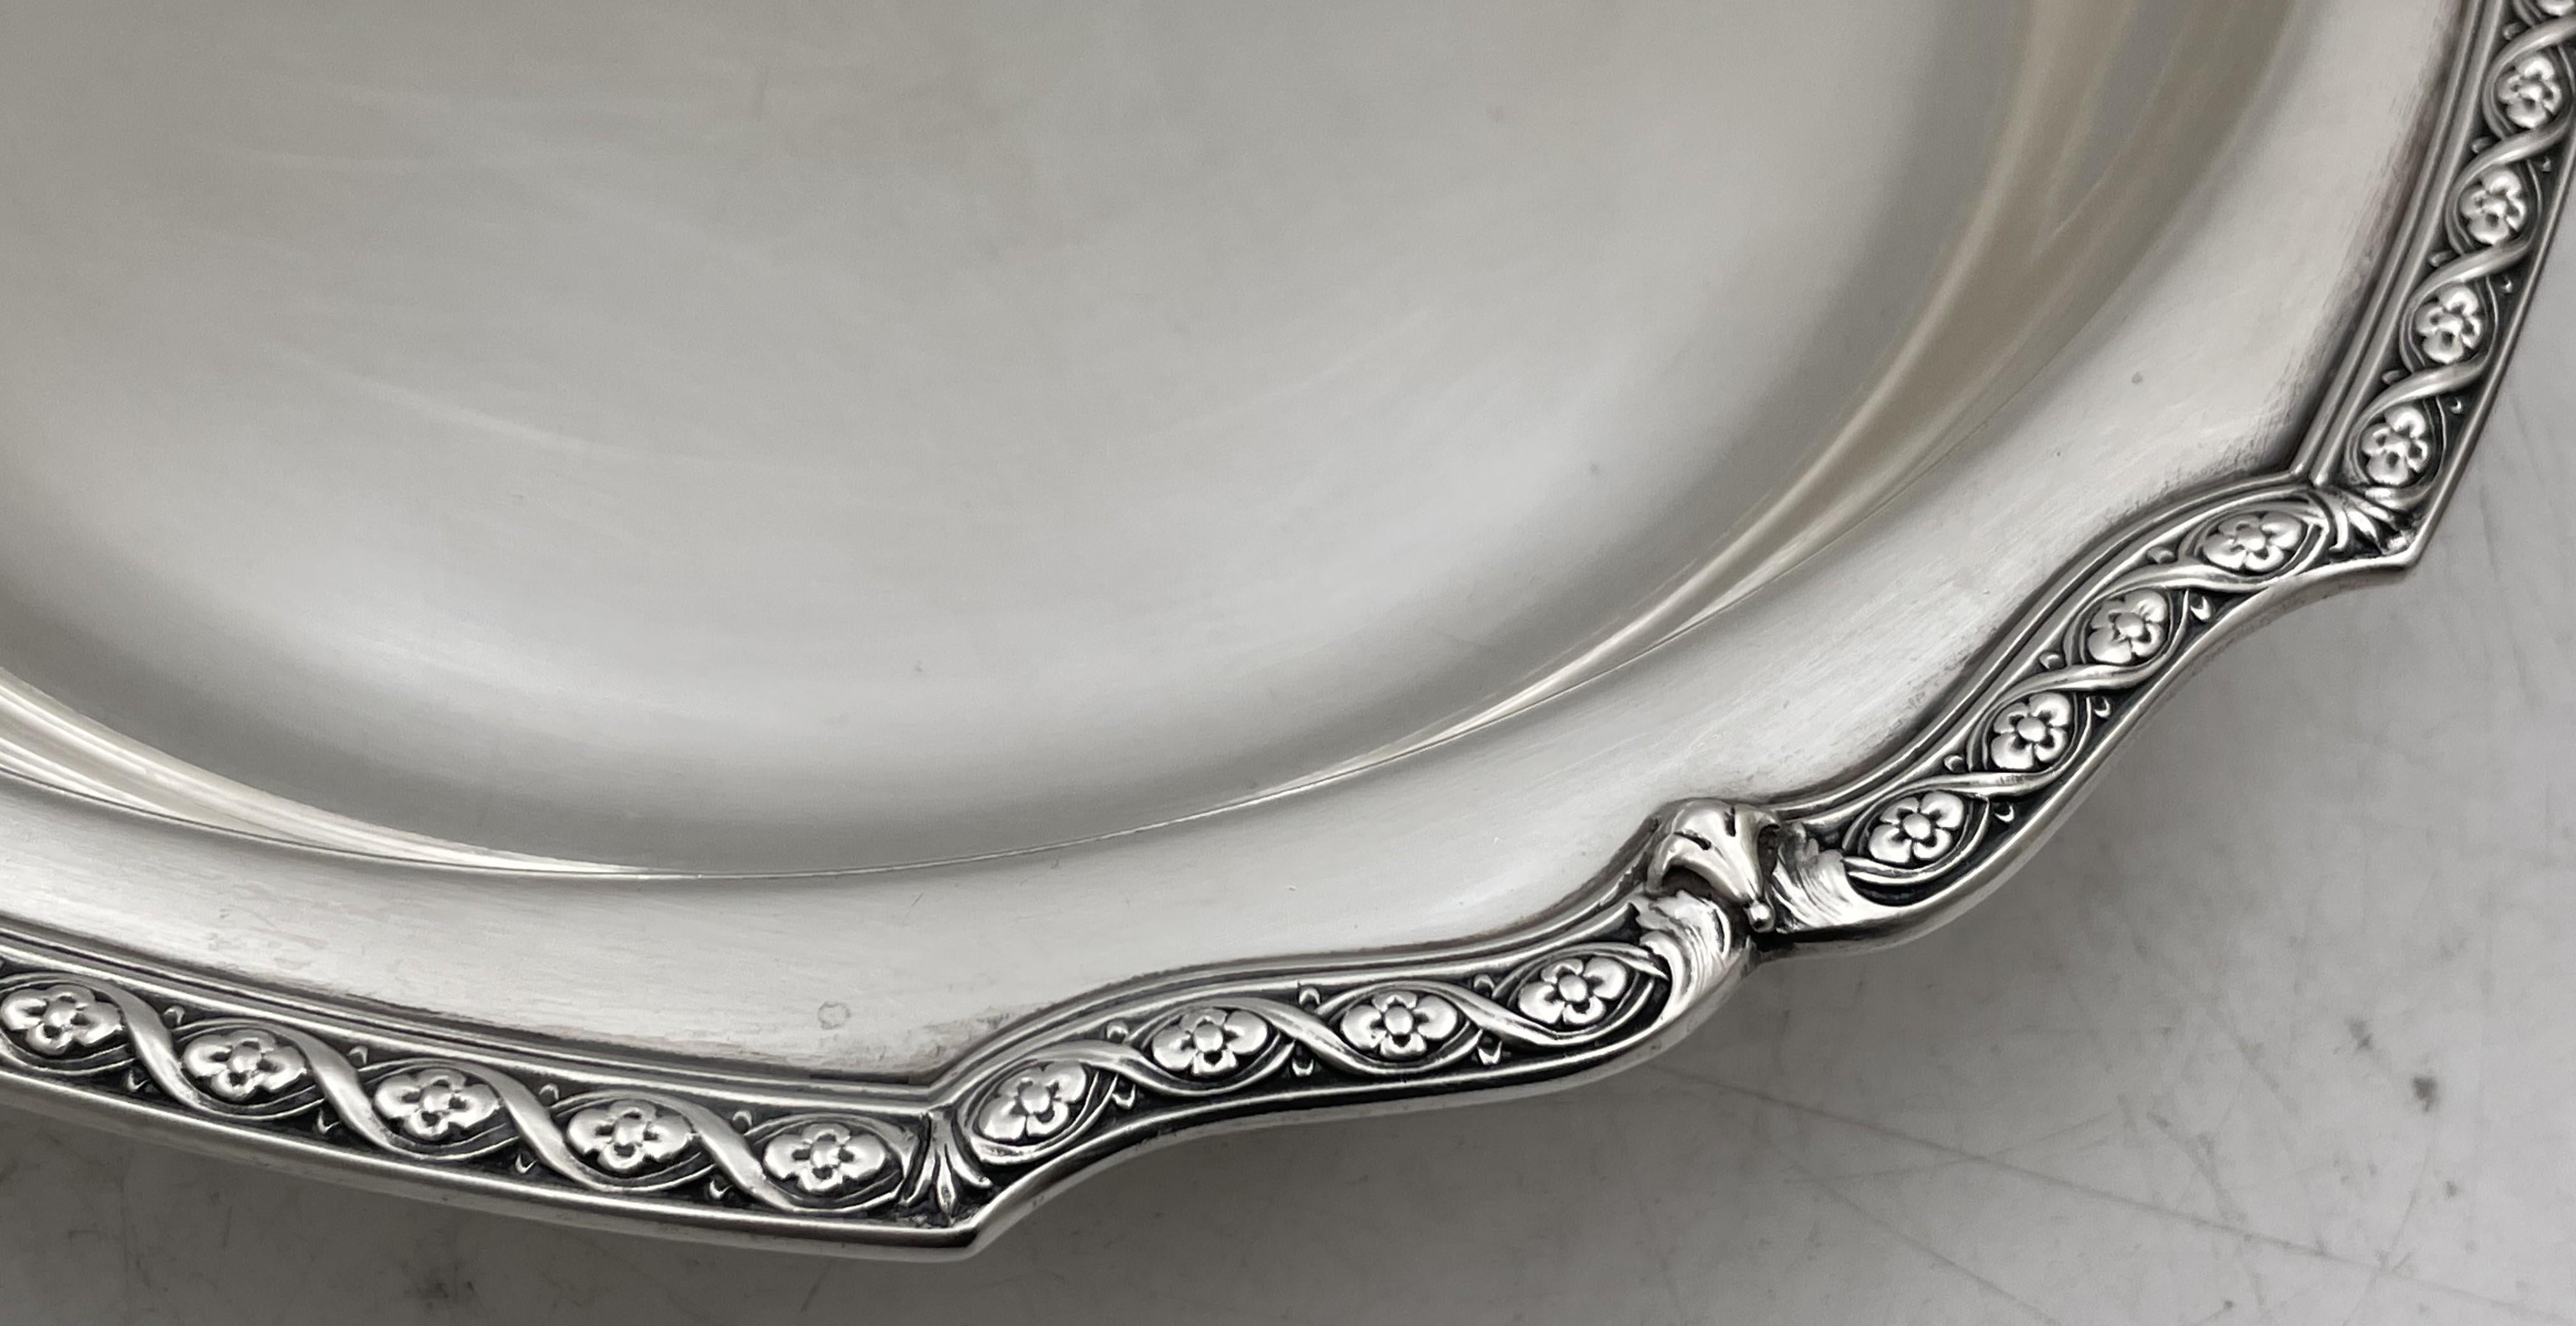 Early 20th Century Tiffany & Co. Sterling Silver 1926 Covered Vegetable Dish Pair of Bowls Art Deco For Sale